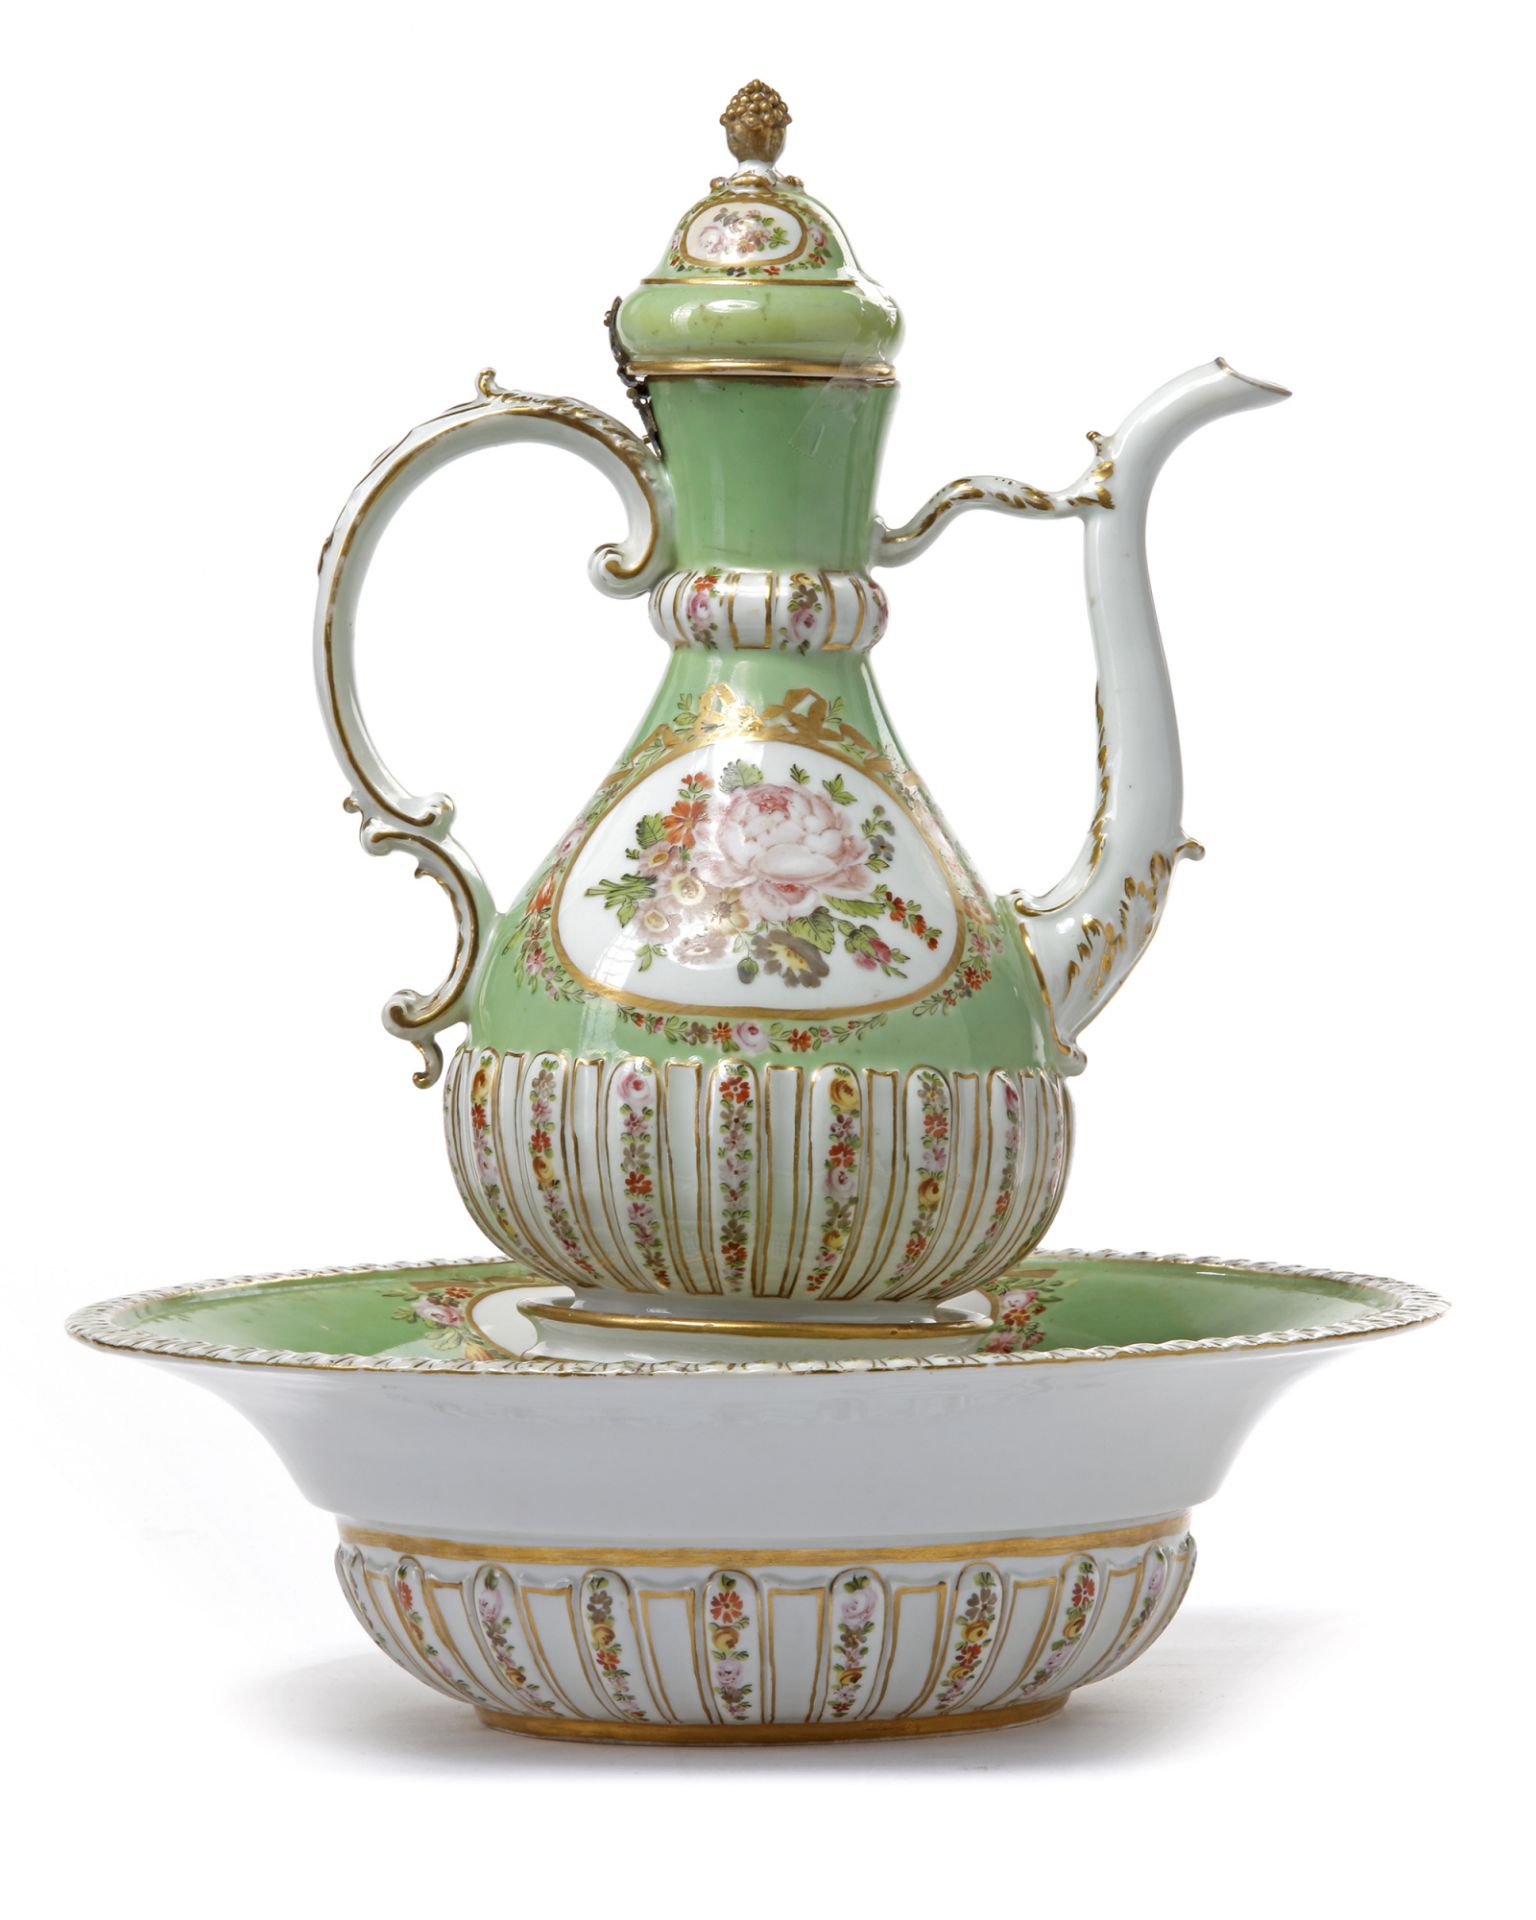 MEISSEN MARCOLINI PERIOD EWER AND BASIN( LEGEN-IBRIK) MARKED COUNT MARCOLINI (1774-1814) MADE FOR TH - Image 3 of 12